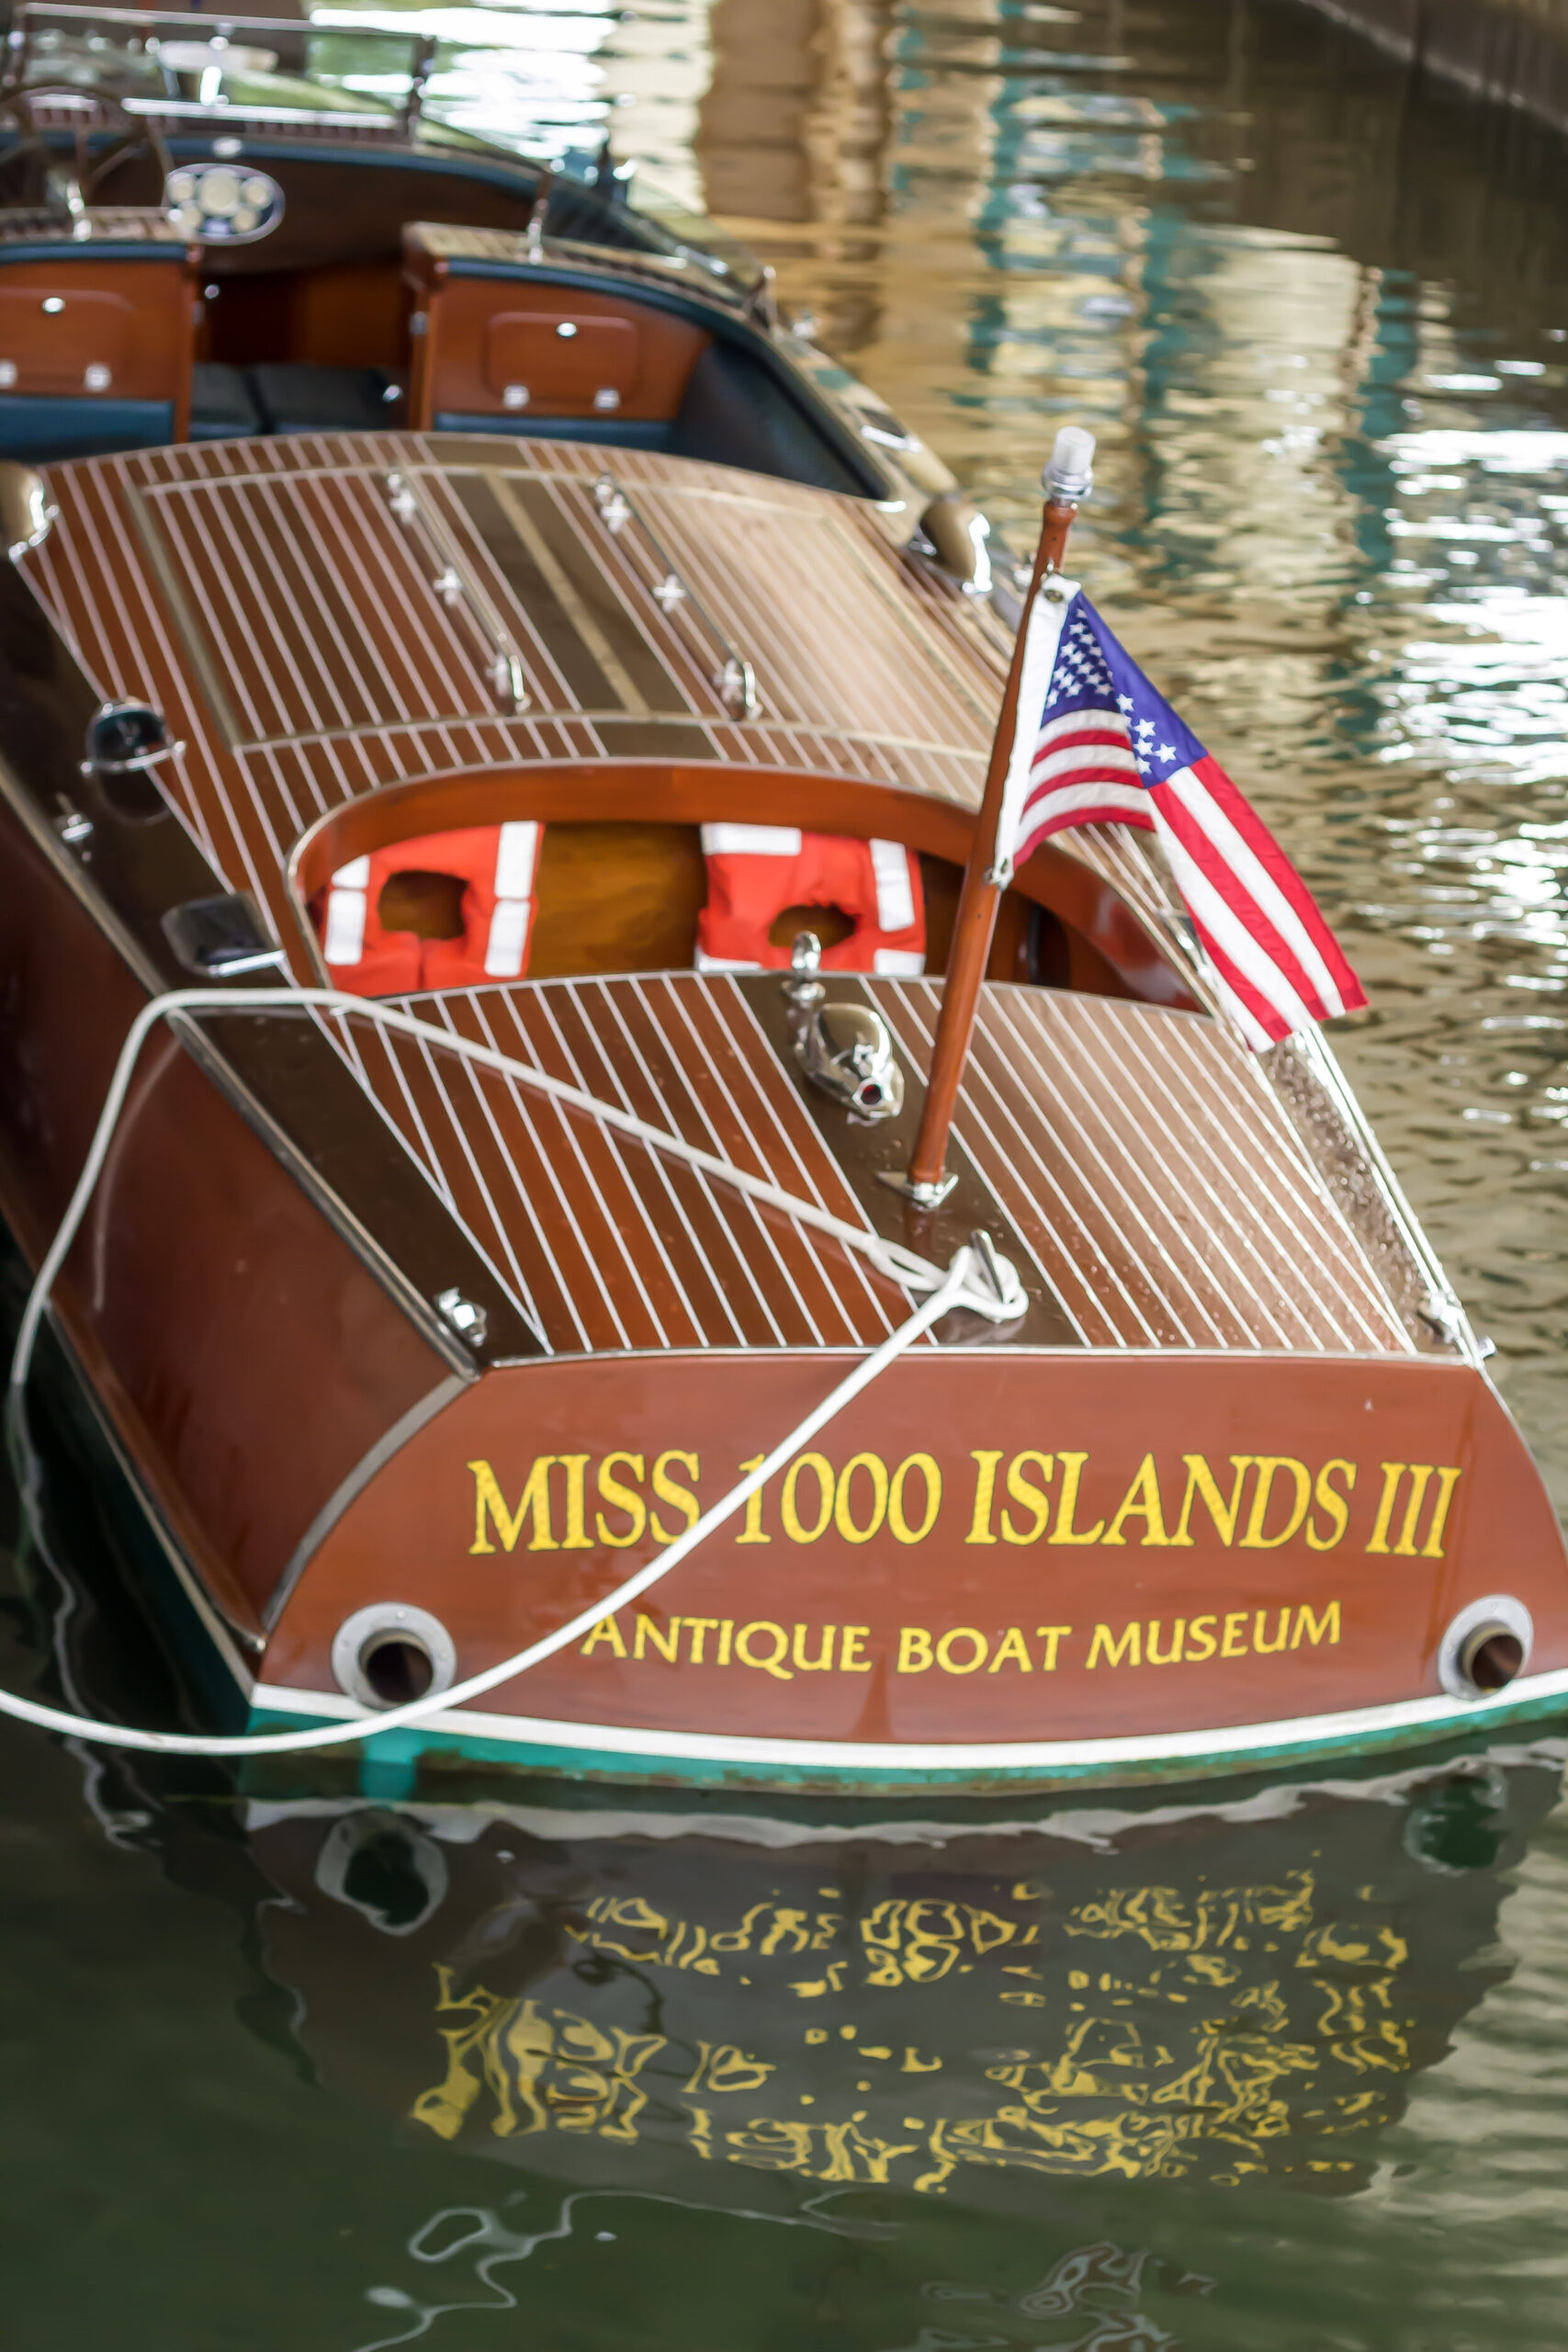 miss-1000-islands-anitque-boat-museum-clayton-ny.jpg